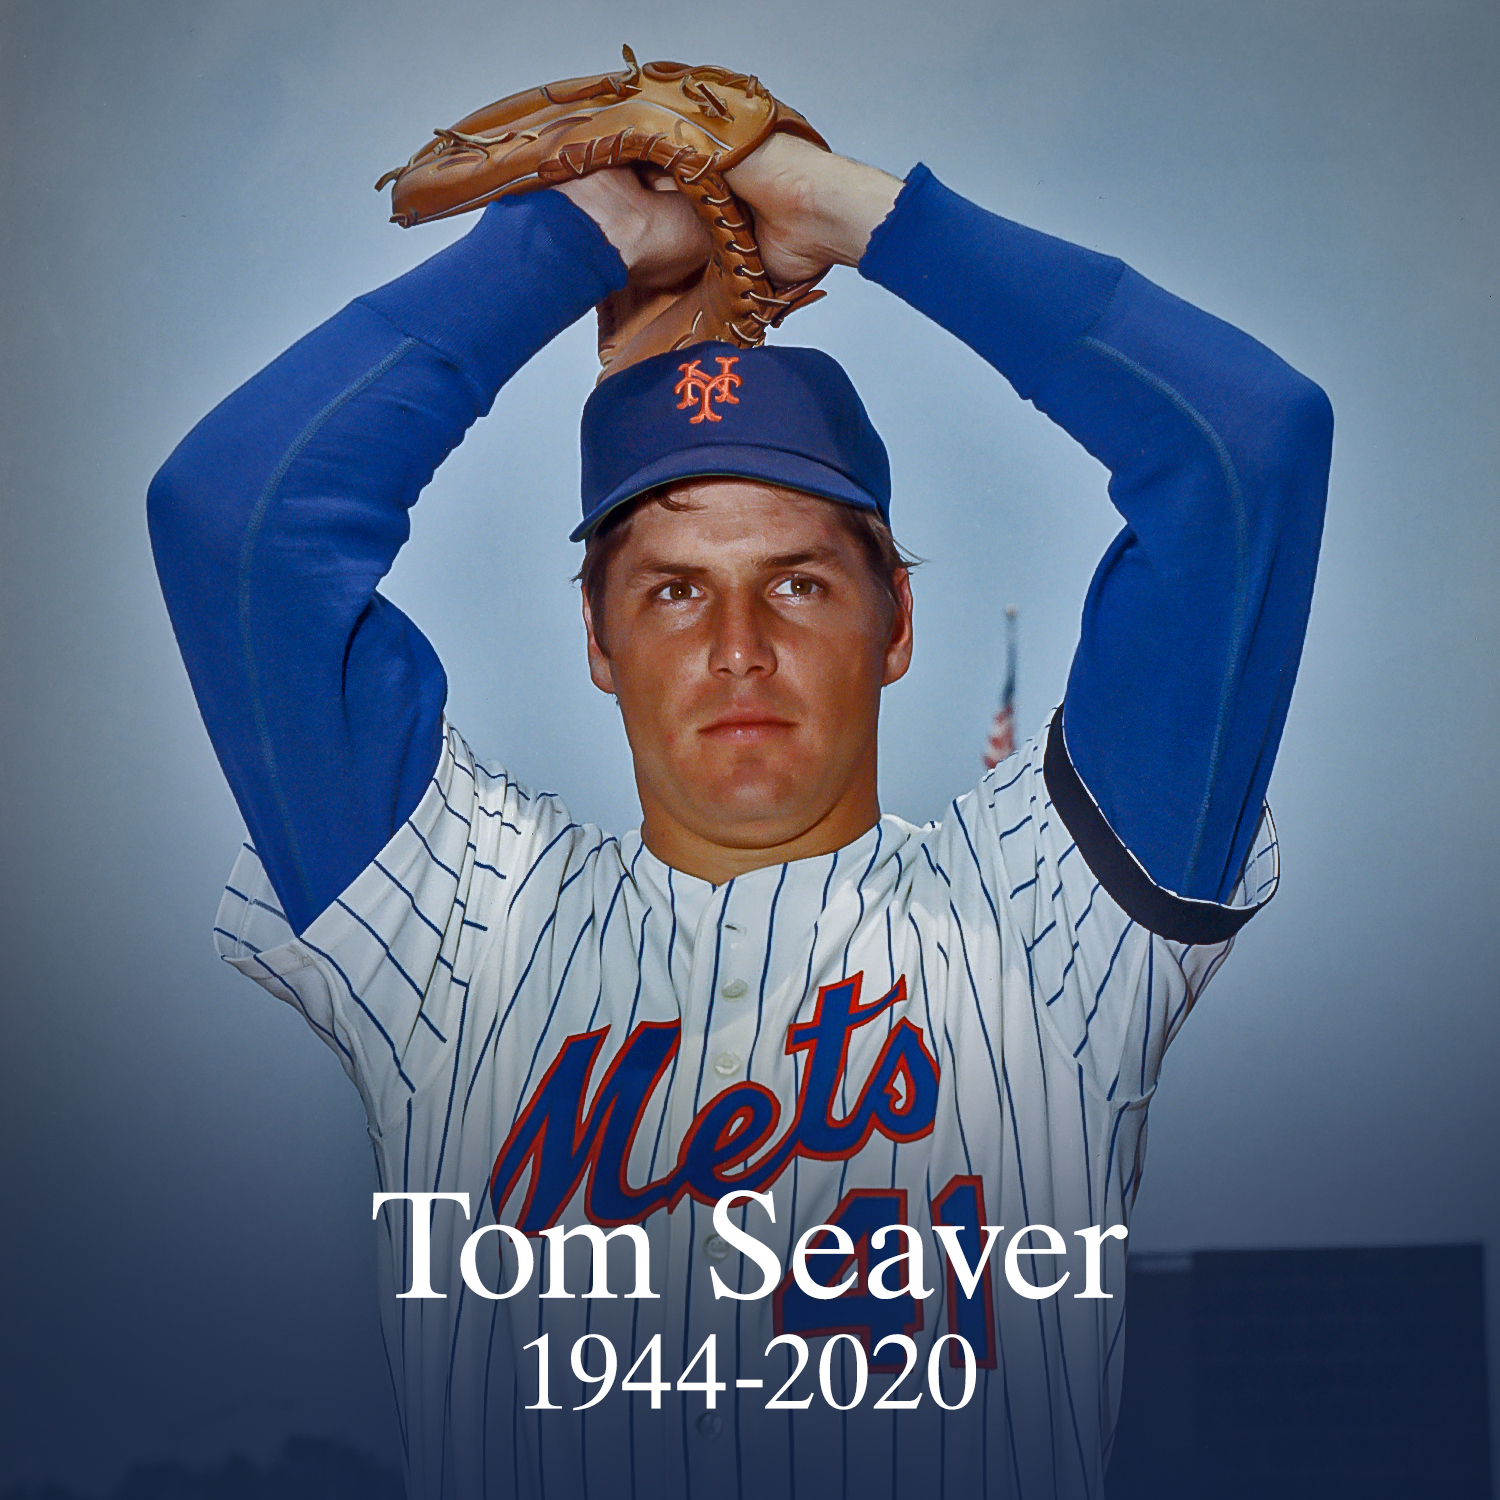 MLB on X: We mourn the passing of Tom Seaver, a Hall of Fame